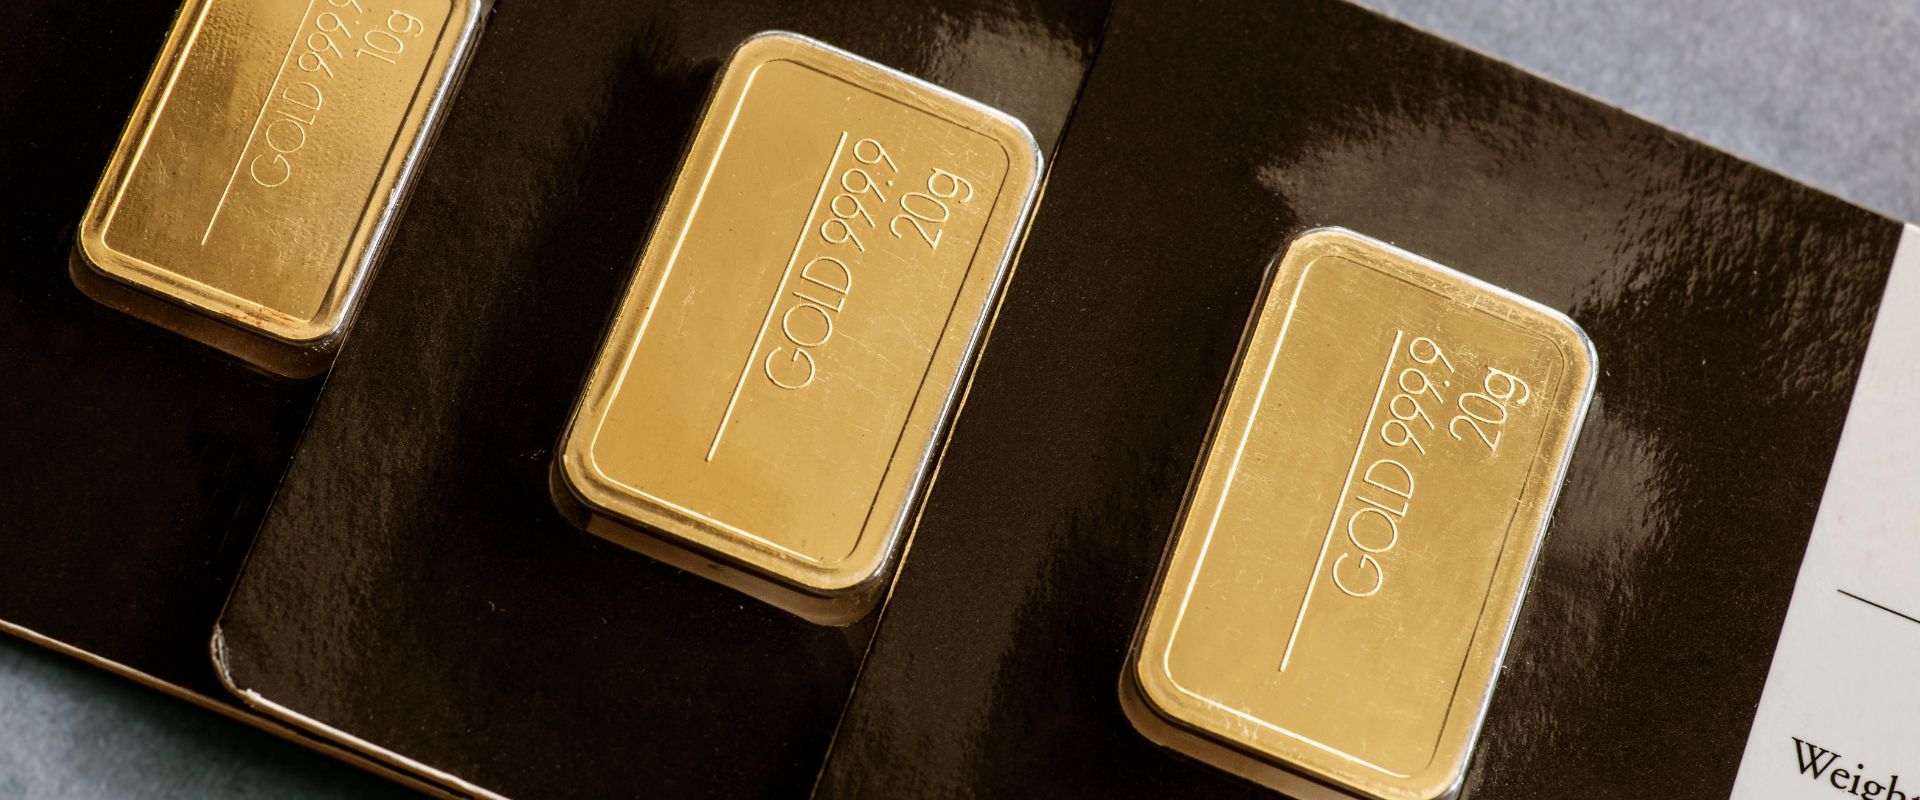 several minted gold bars in different weight